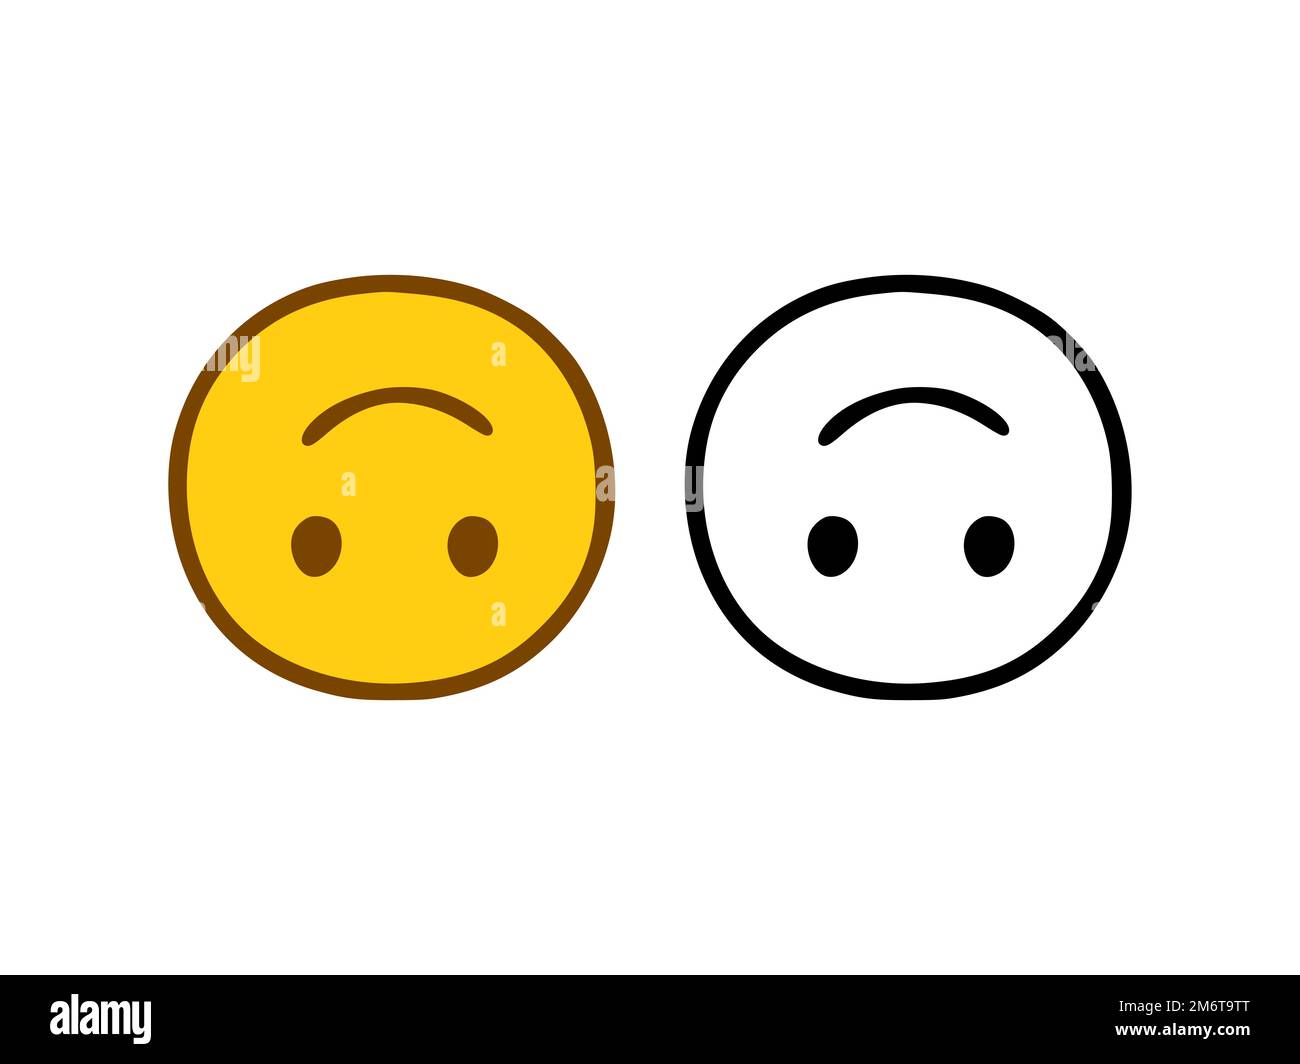 Happy face emoticon in doodle style isolated on white background Stock Photo